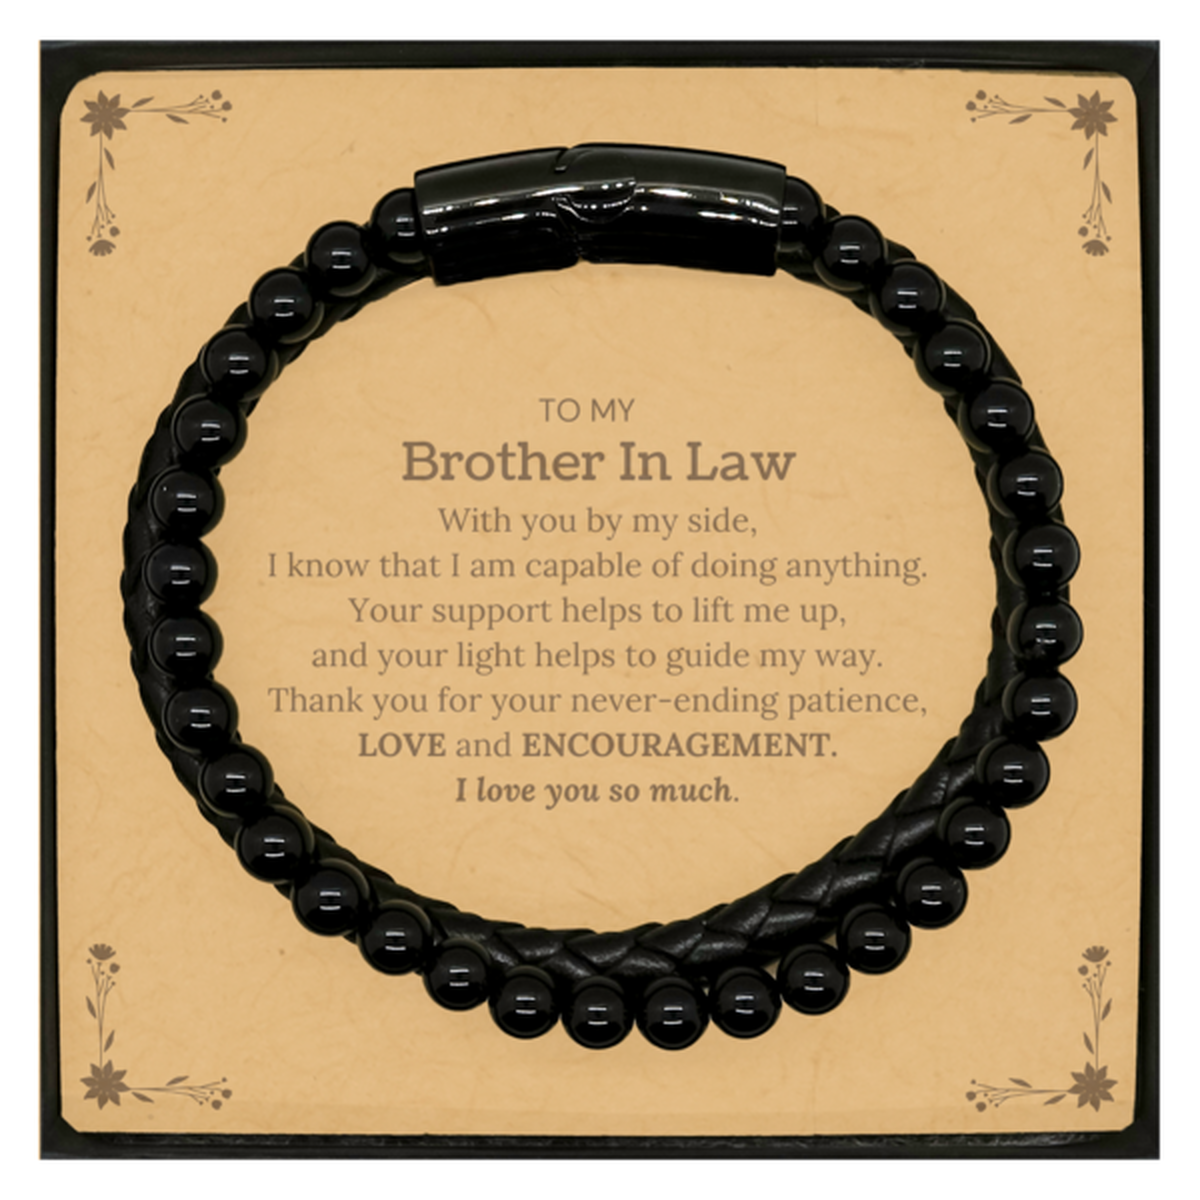 Appreciation Brother In Law Stone Leather Bracelets Gifts, To My Brother In Law Birthday Christmas Wedding Keepsake Gifts for Brother In Law With you by my side, I know that I am capable of doing anything. I love you so much